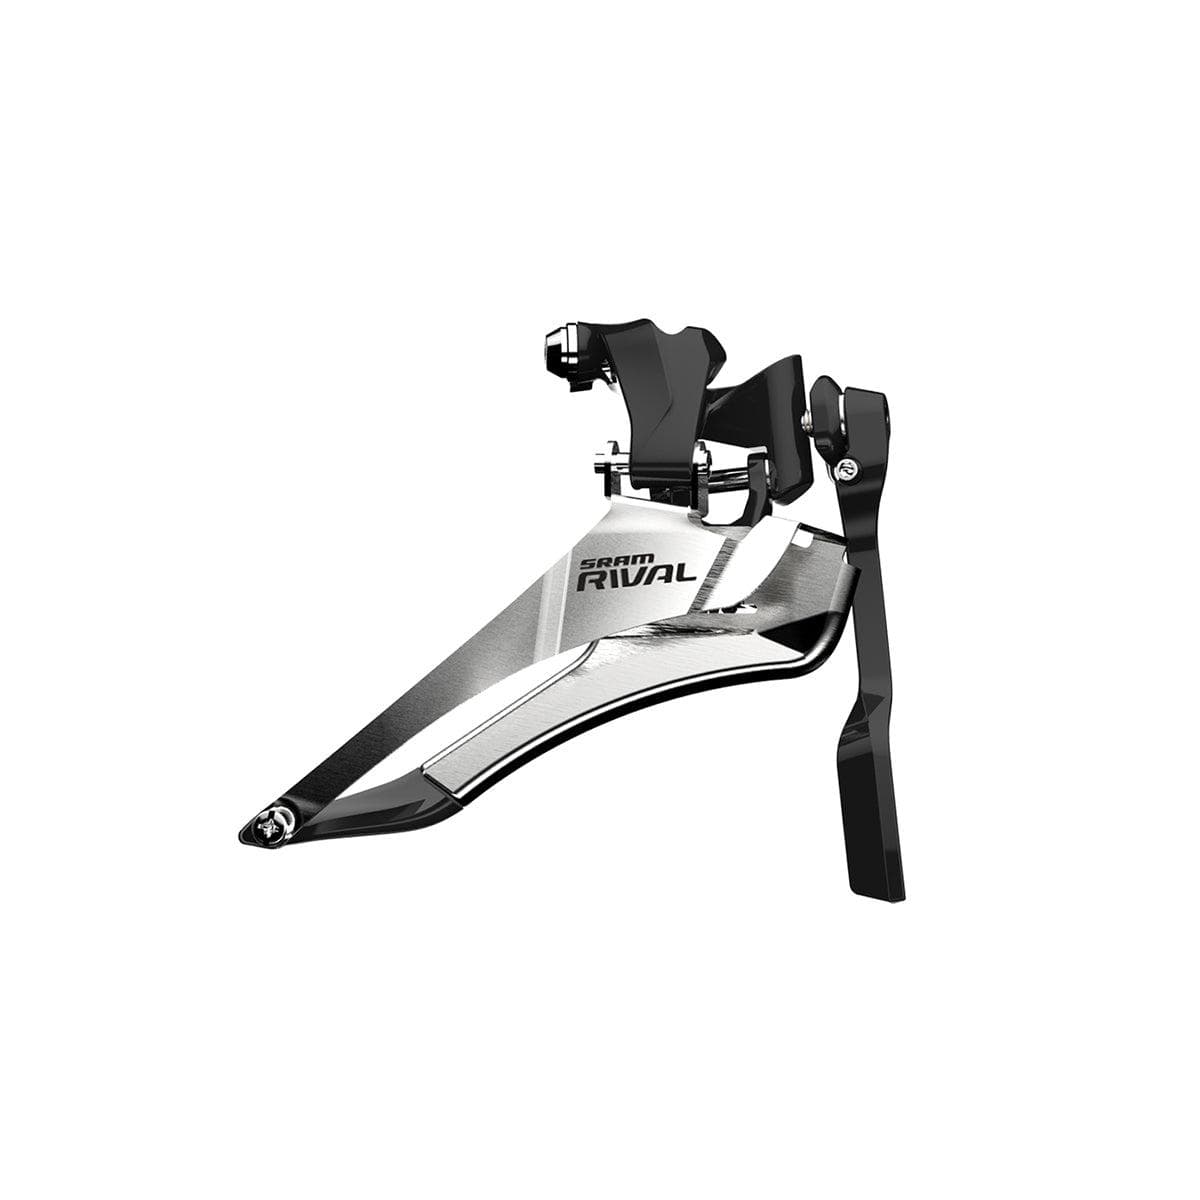 Sram Rival22 Front Derailleur Yaw Braze-On With Chain Spotter: